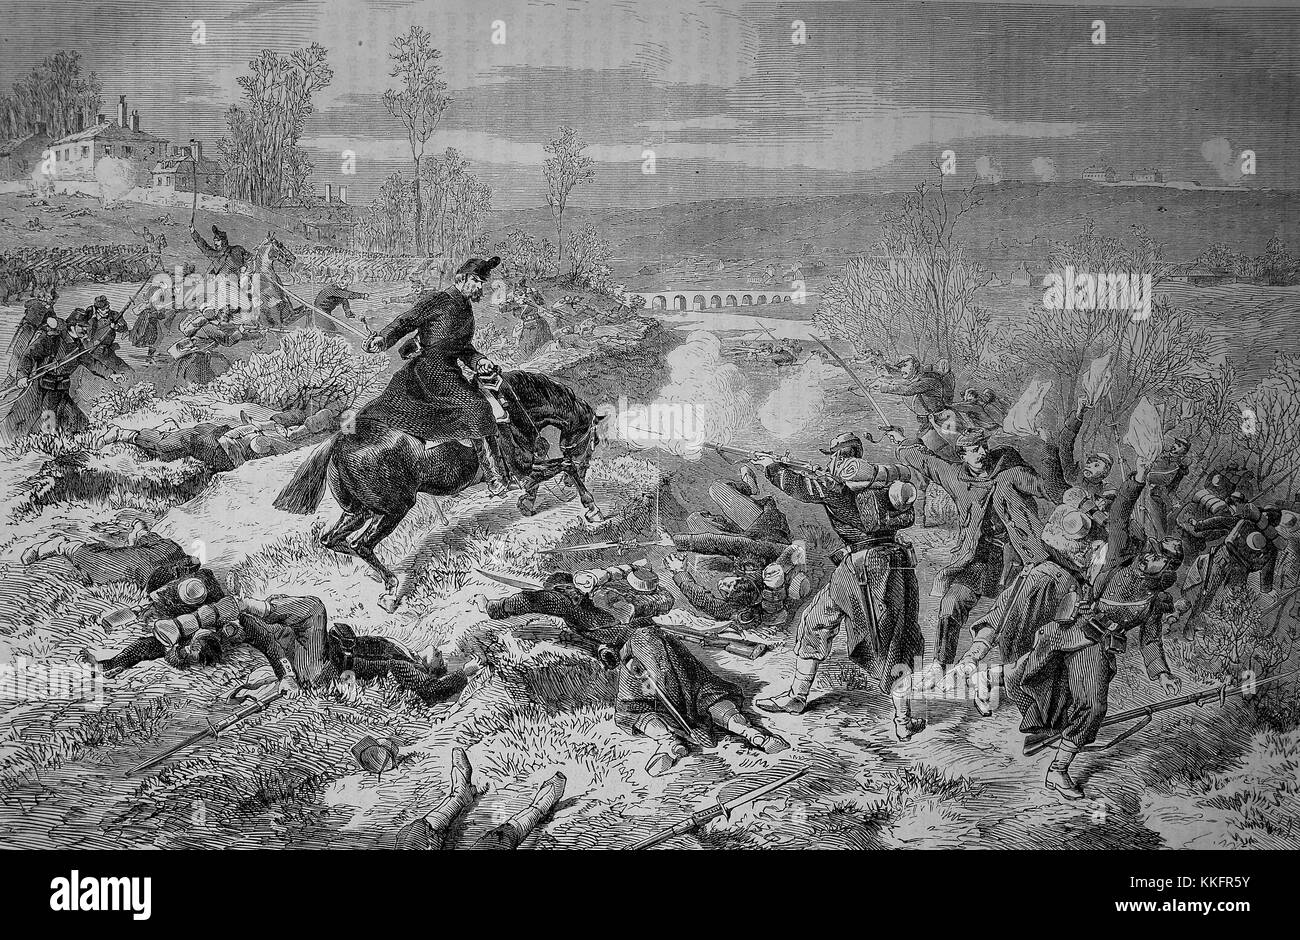 The Royal Saxon Rifle Regiment No.108 in the battle near Villiers on 2 December, France, Franco-German War 1870/71, Franco-Prussian War or Franco-German War, War of 1870, a conflict between the Second French Empire of Napoleon III and the German states of the North German Confederation led by the Kingdom of Prussia, Digital improved reproduction of an original woodcut Stock Photo